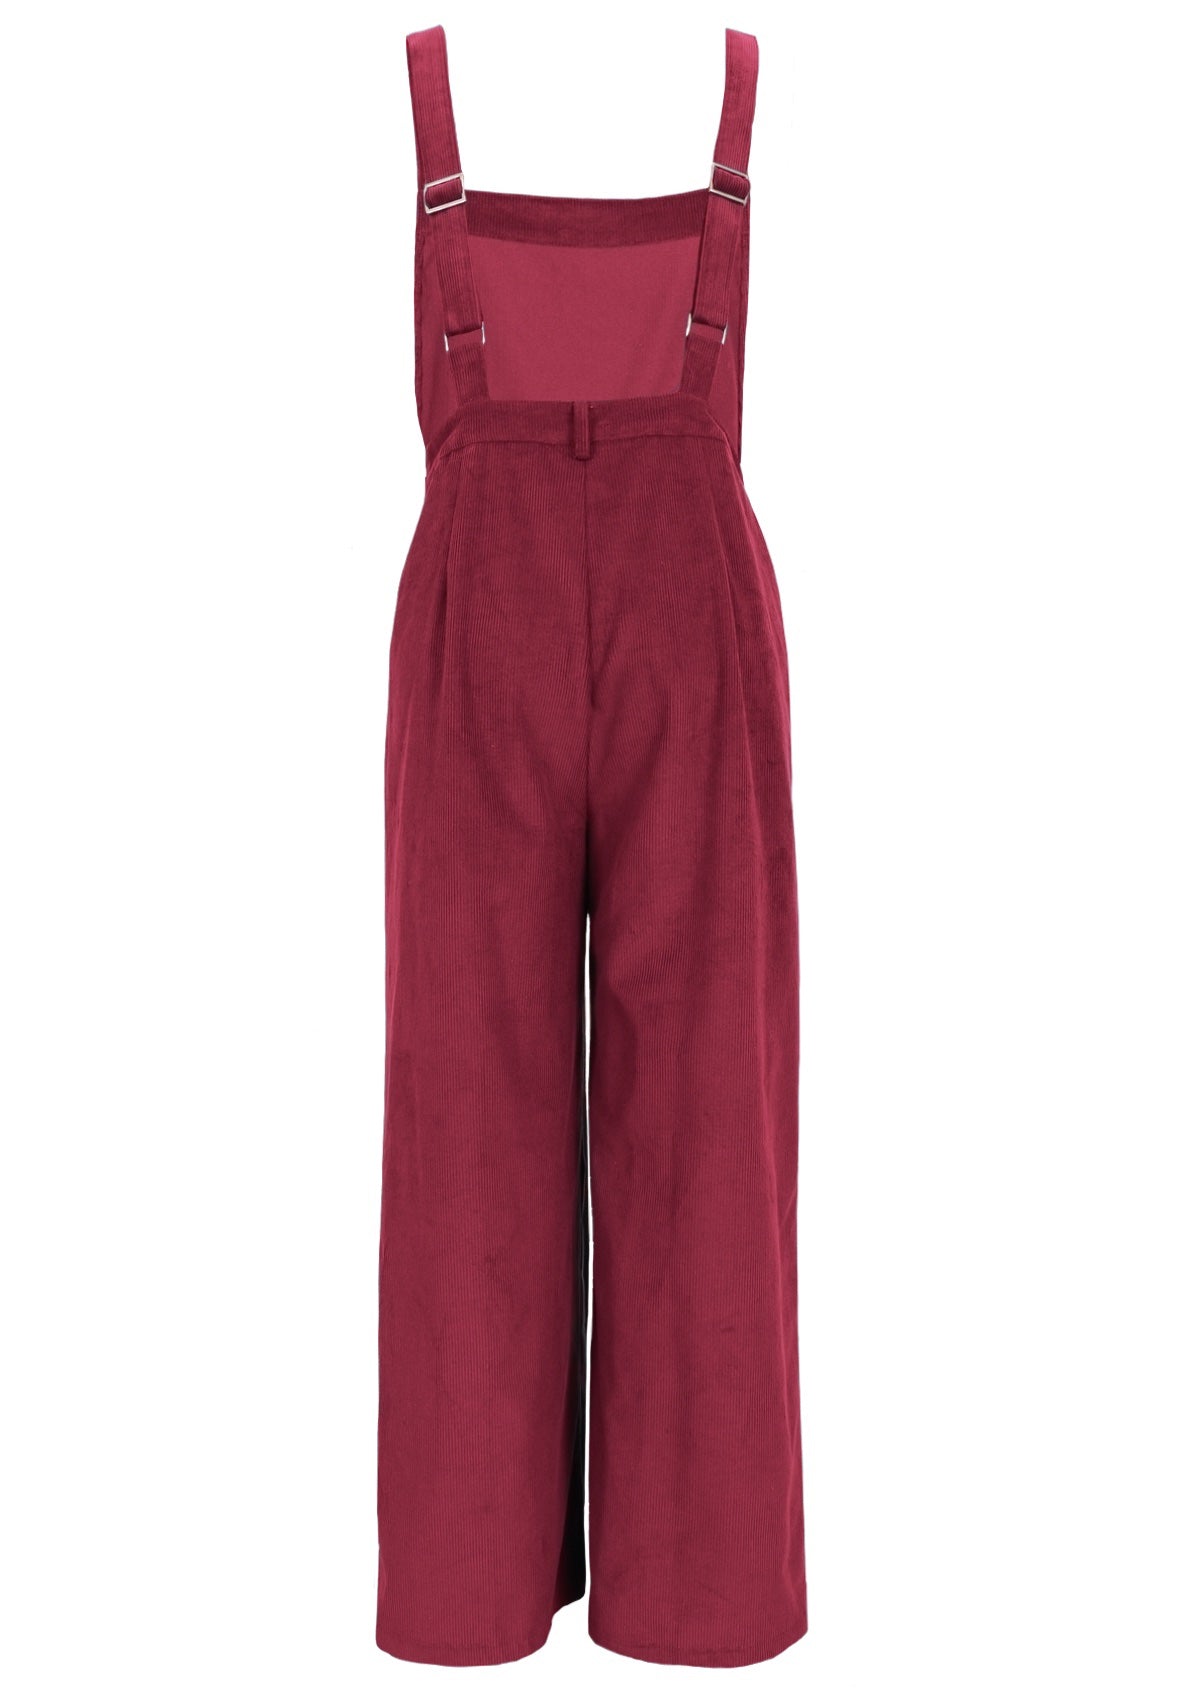 Red corduroy overalls feature pockets and a side zip